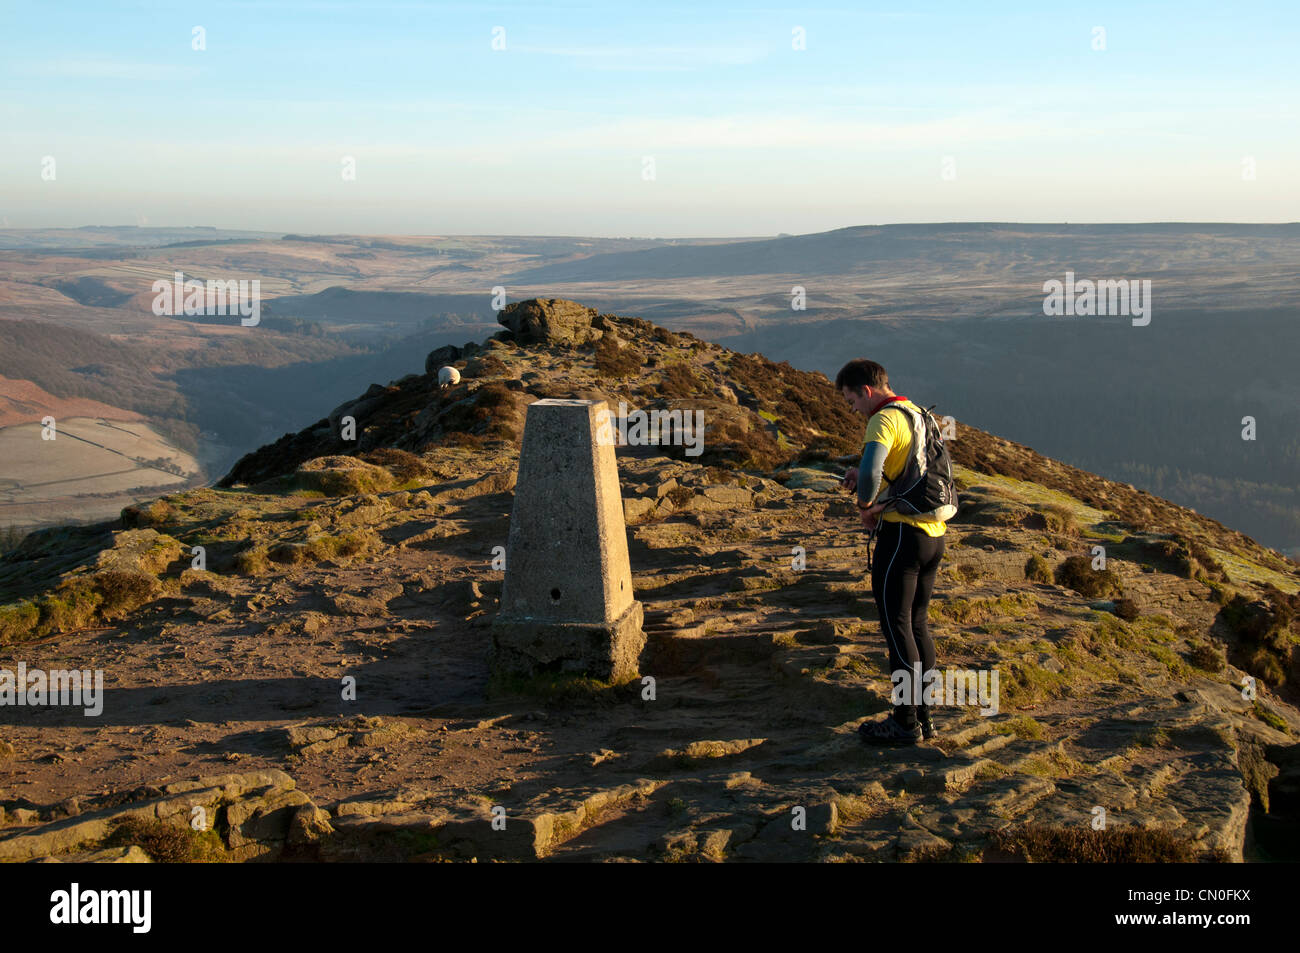 A fell runner at the trig point, summit of Win Hill, near Hope, Peak District, Derbyshire, England, UK. Hope Valley behind. Stock Photo